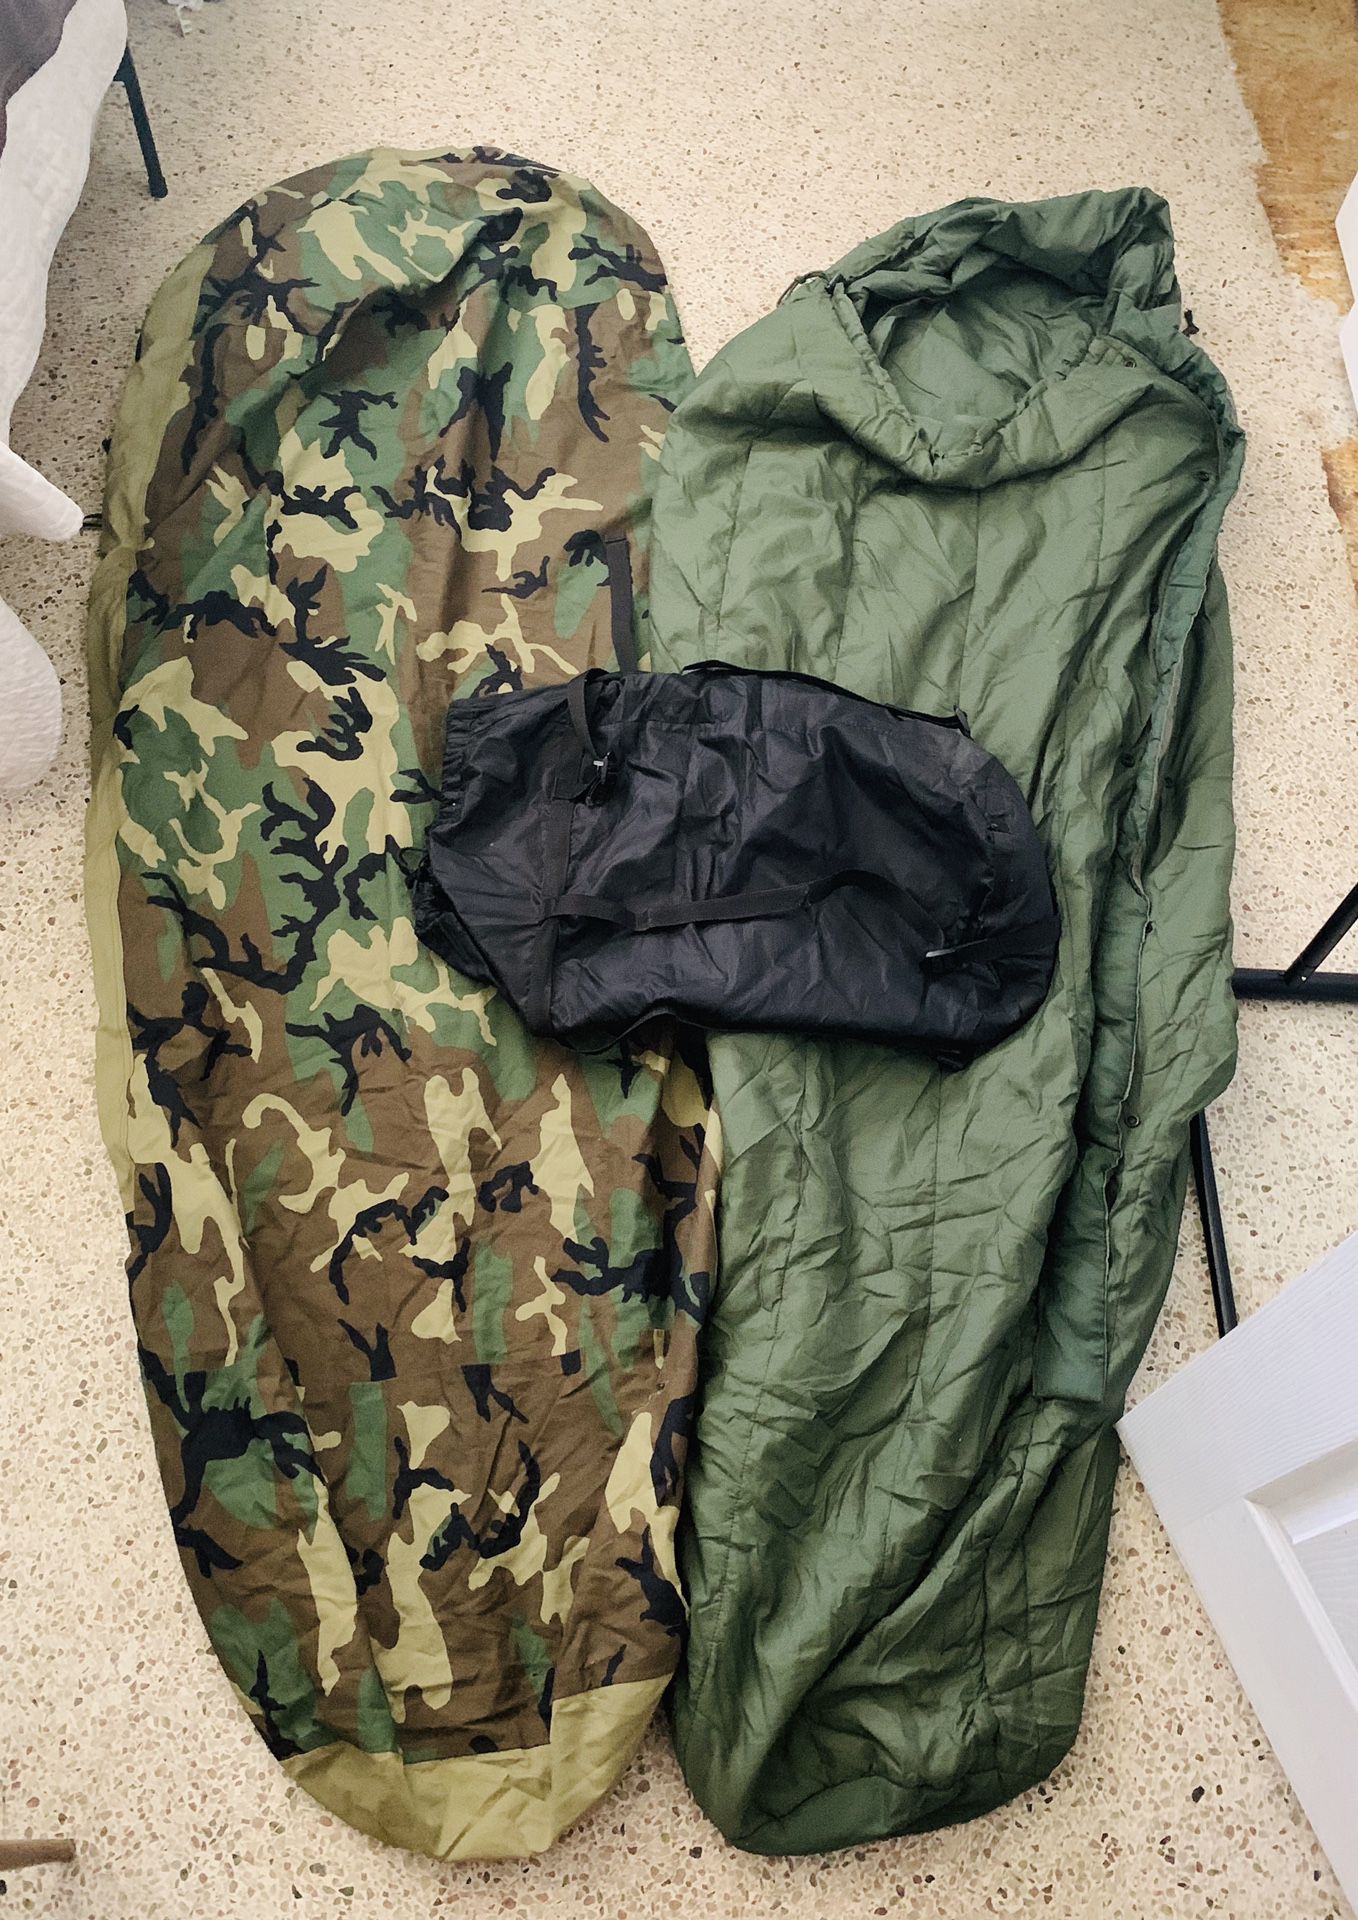 Sleeping bag and waterproof shell (needs small patch)